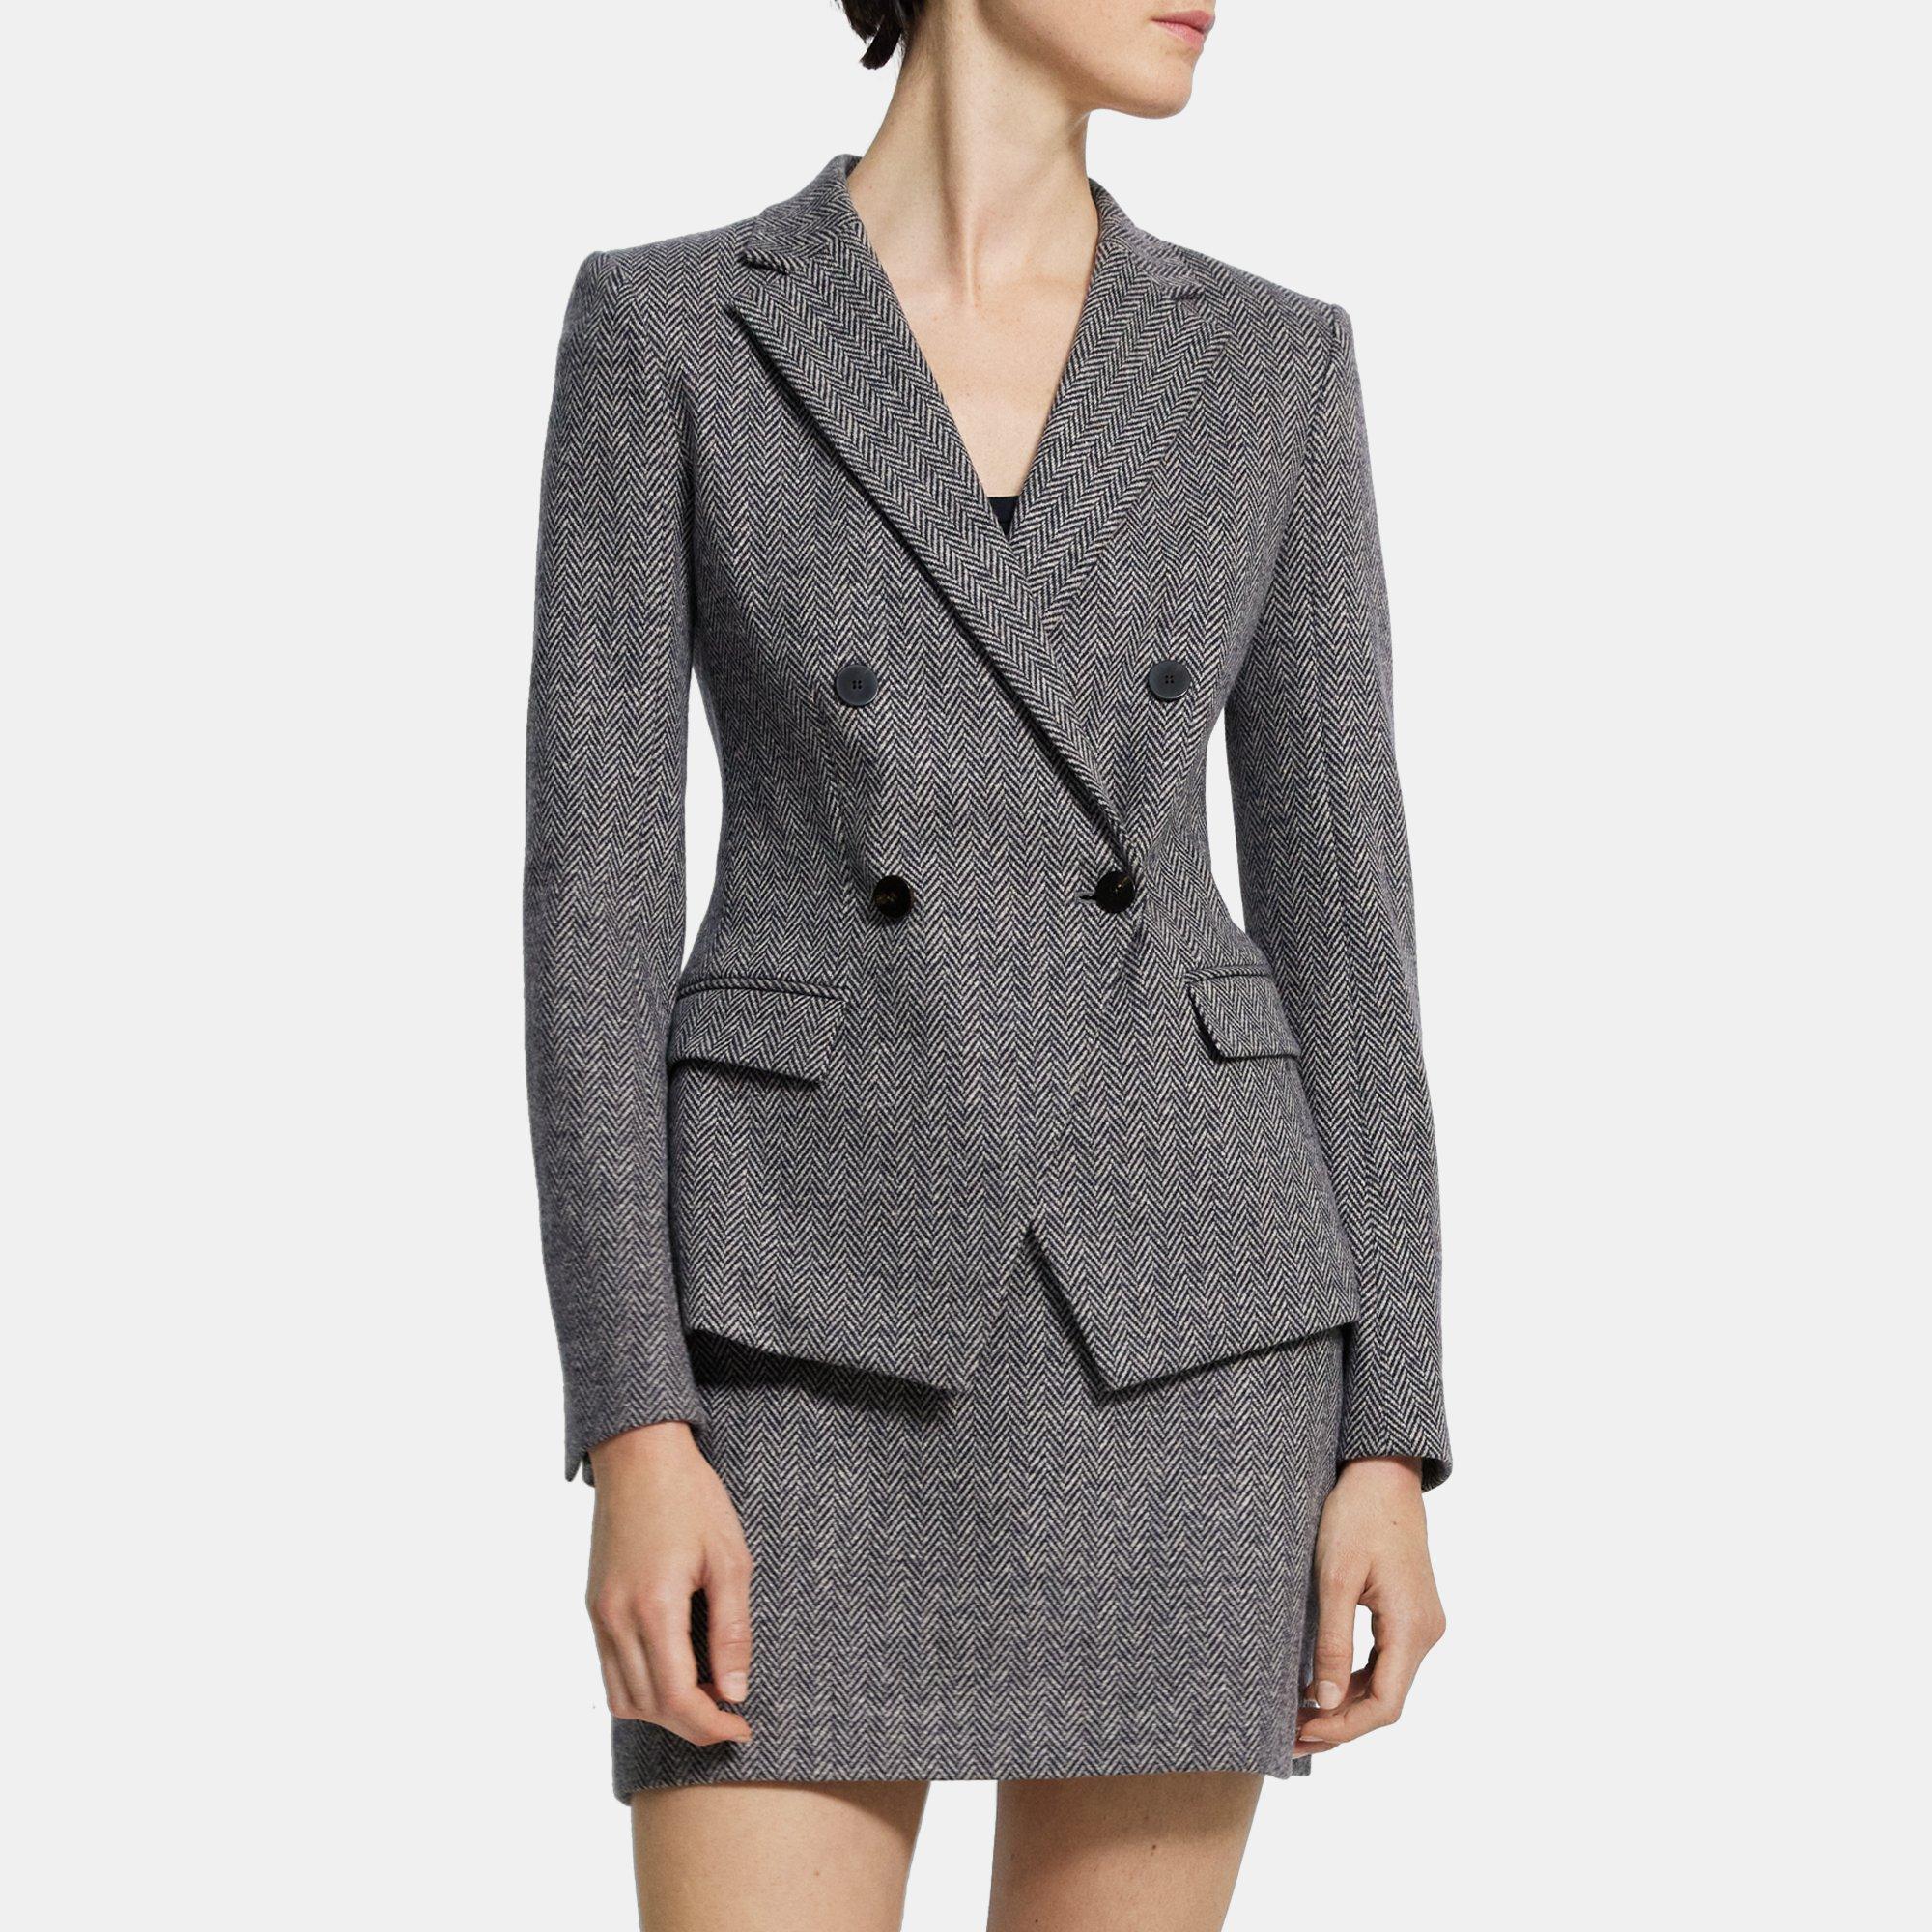 Theory Angled Blazer in Wool Blend Knit